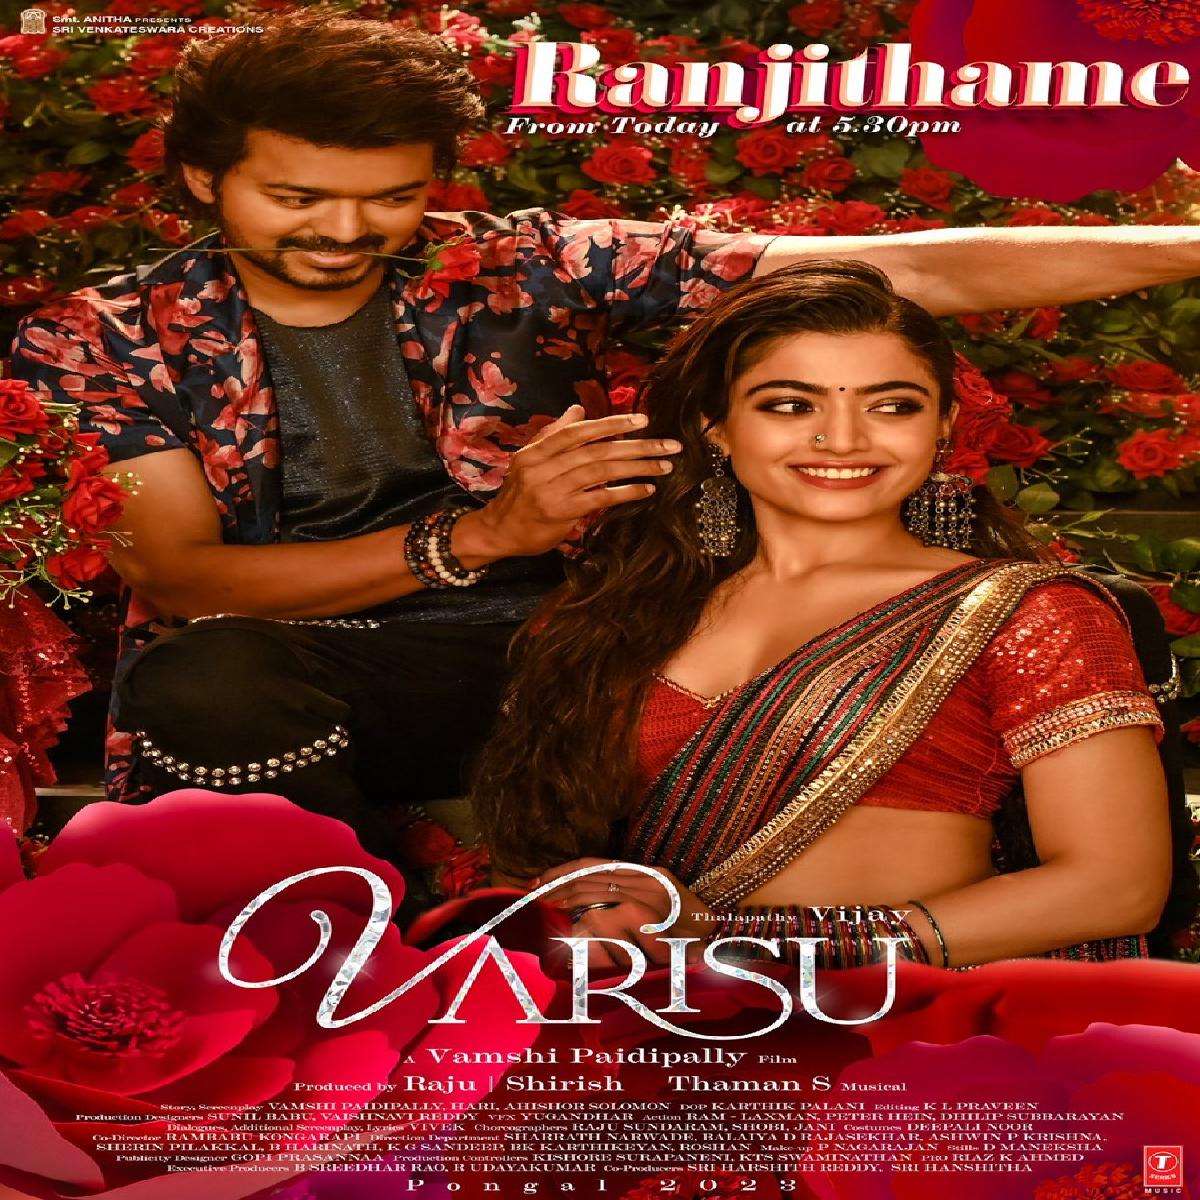 Ranjithame From Varisu Out Today!